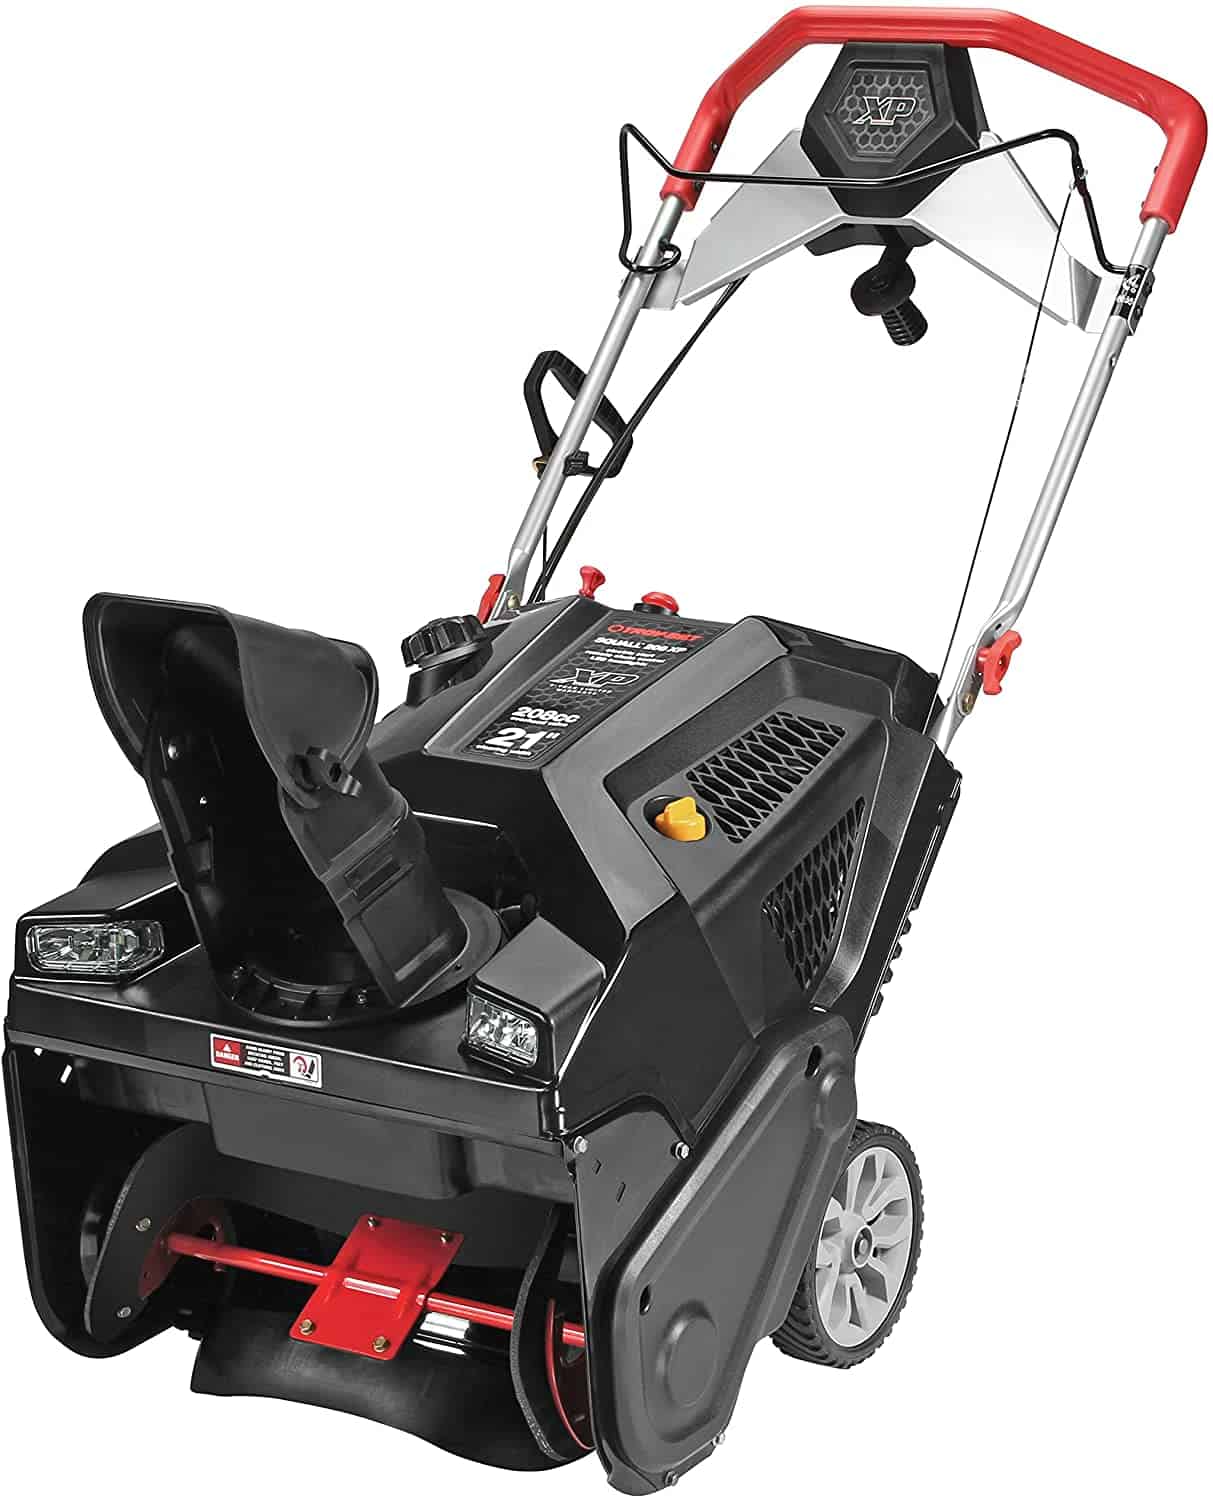 Troy-Bilt Squall XP 208cc Electric Start 21-Inch Single Stage Gas Snow Thrower